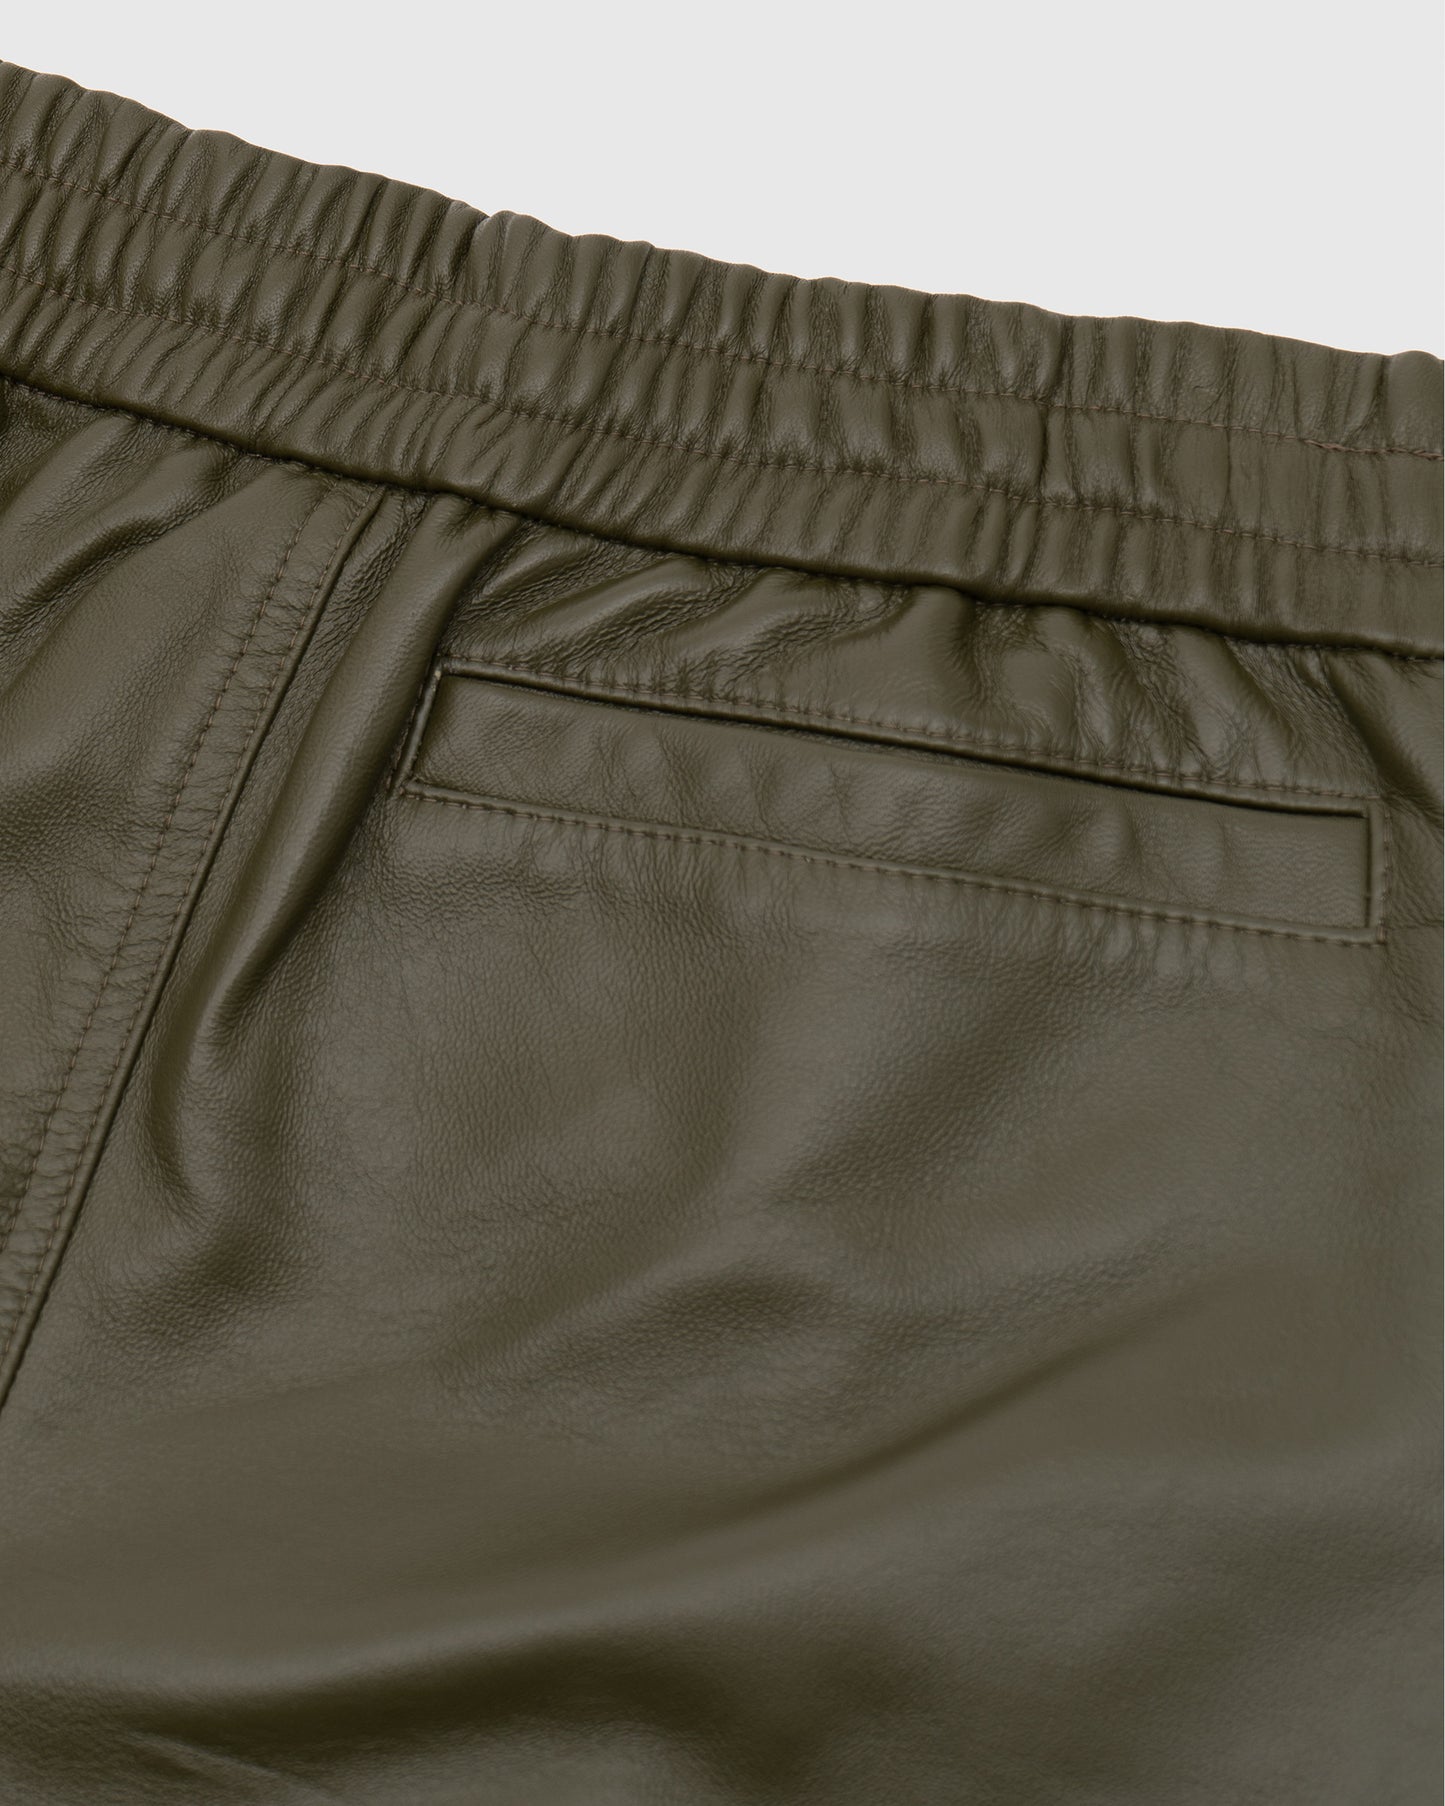 Nappa Leather Trouser - Due Diligence Apparel